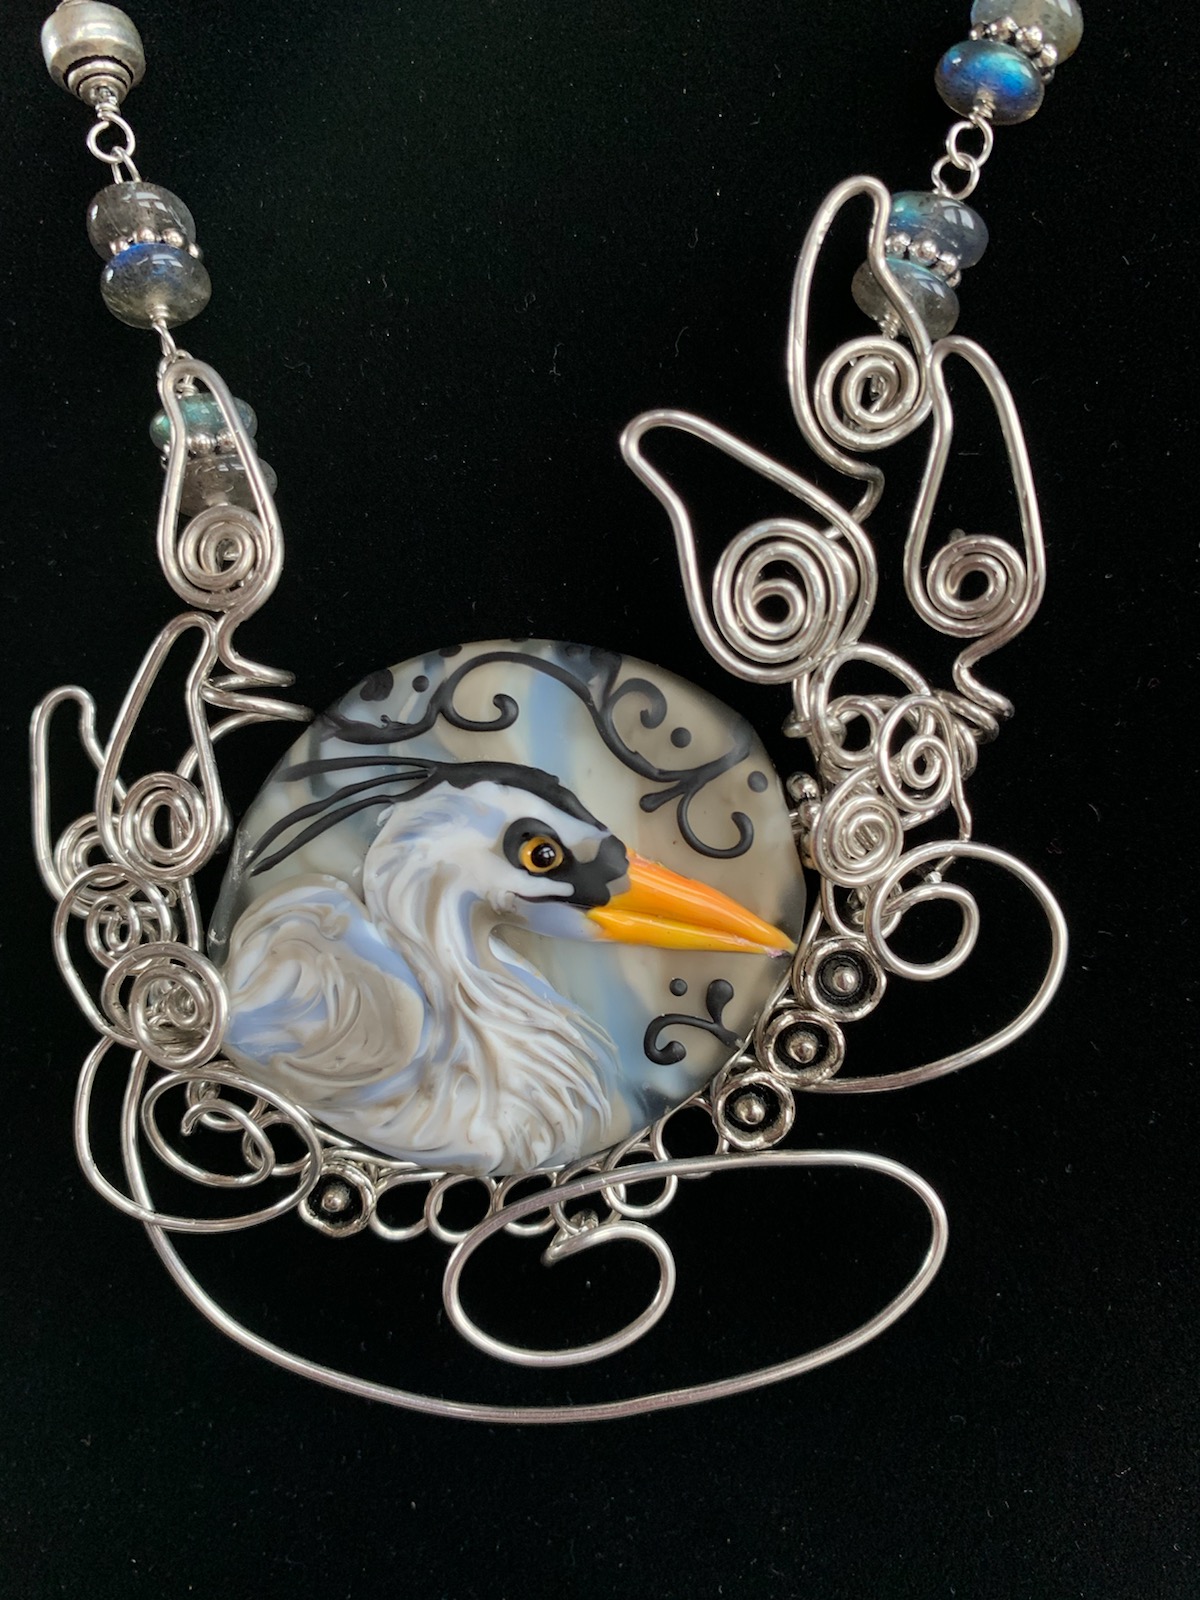 Glass bead by Keri Fuhr featring a grey heron head with yellow beak set in scrolls and spirals of silver wire by Melanie Schow